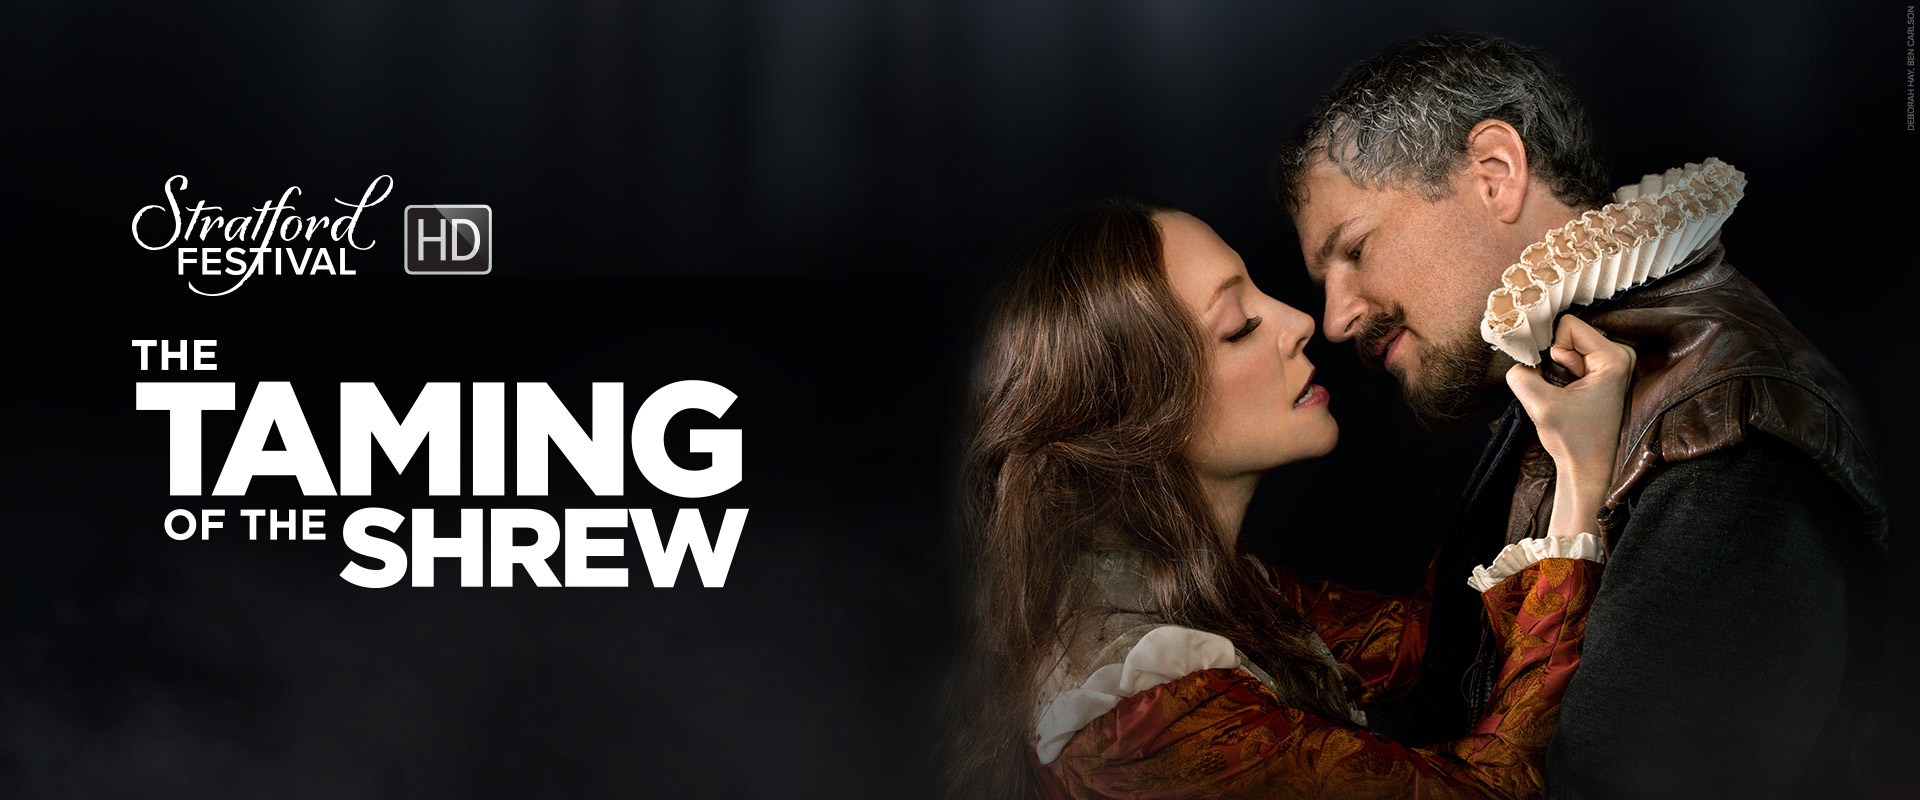 stratford taming of the shrew review